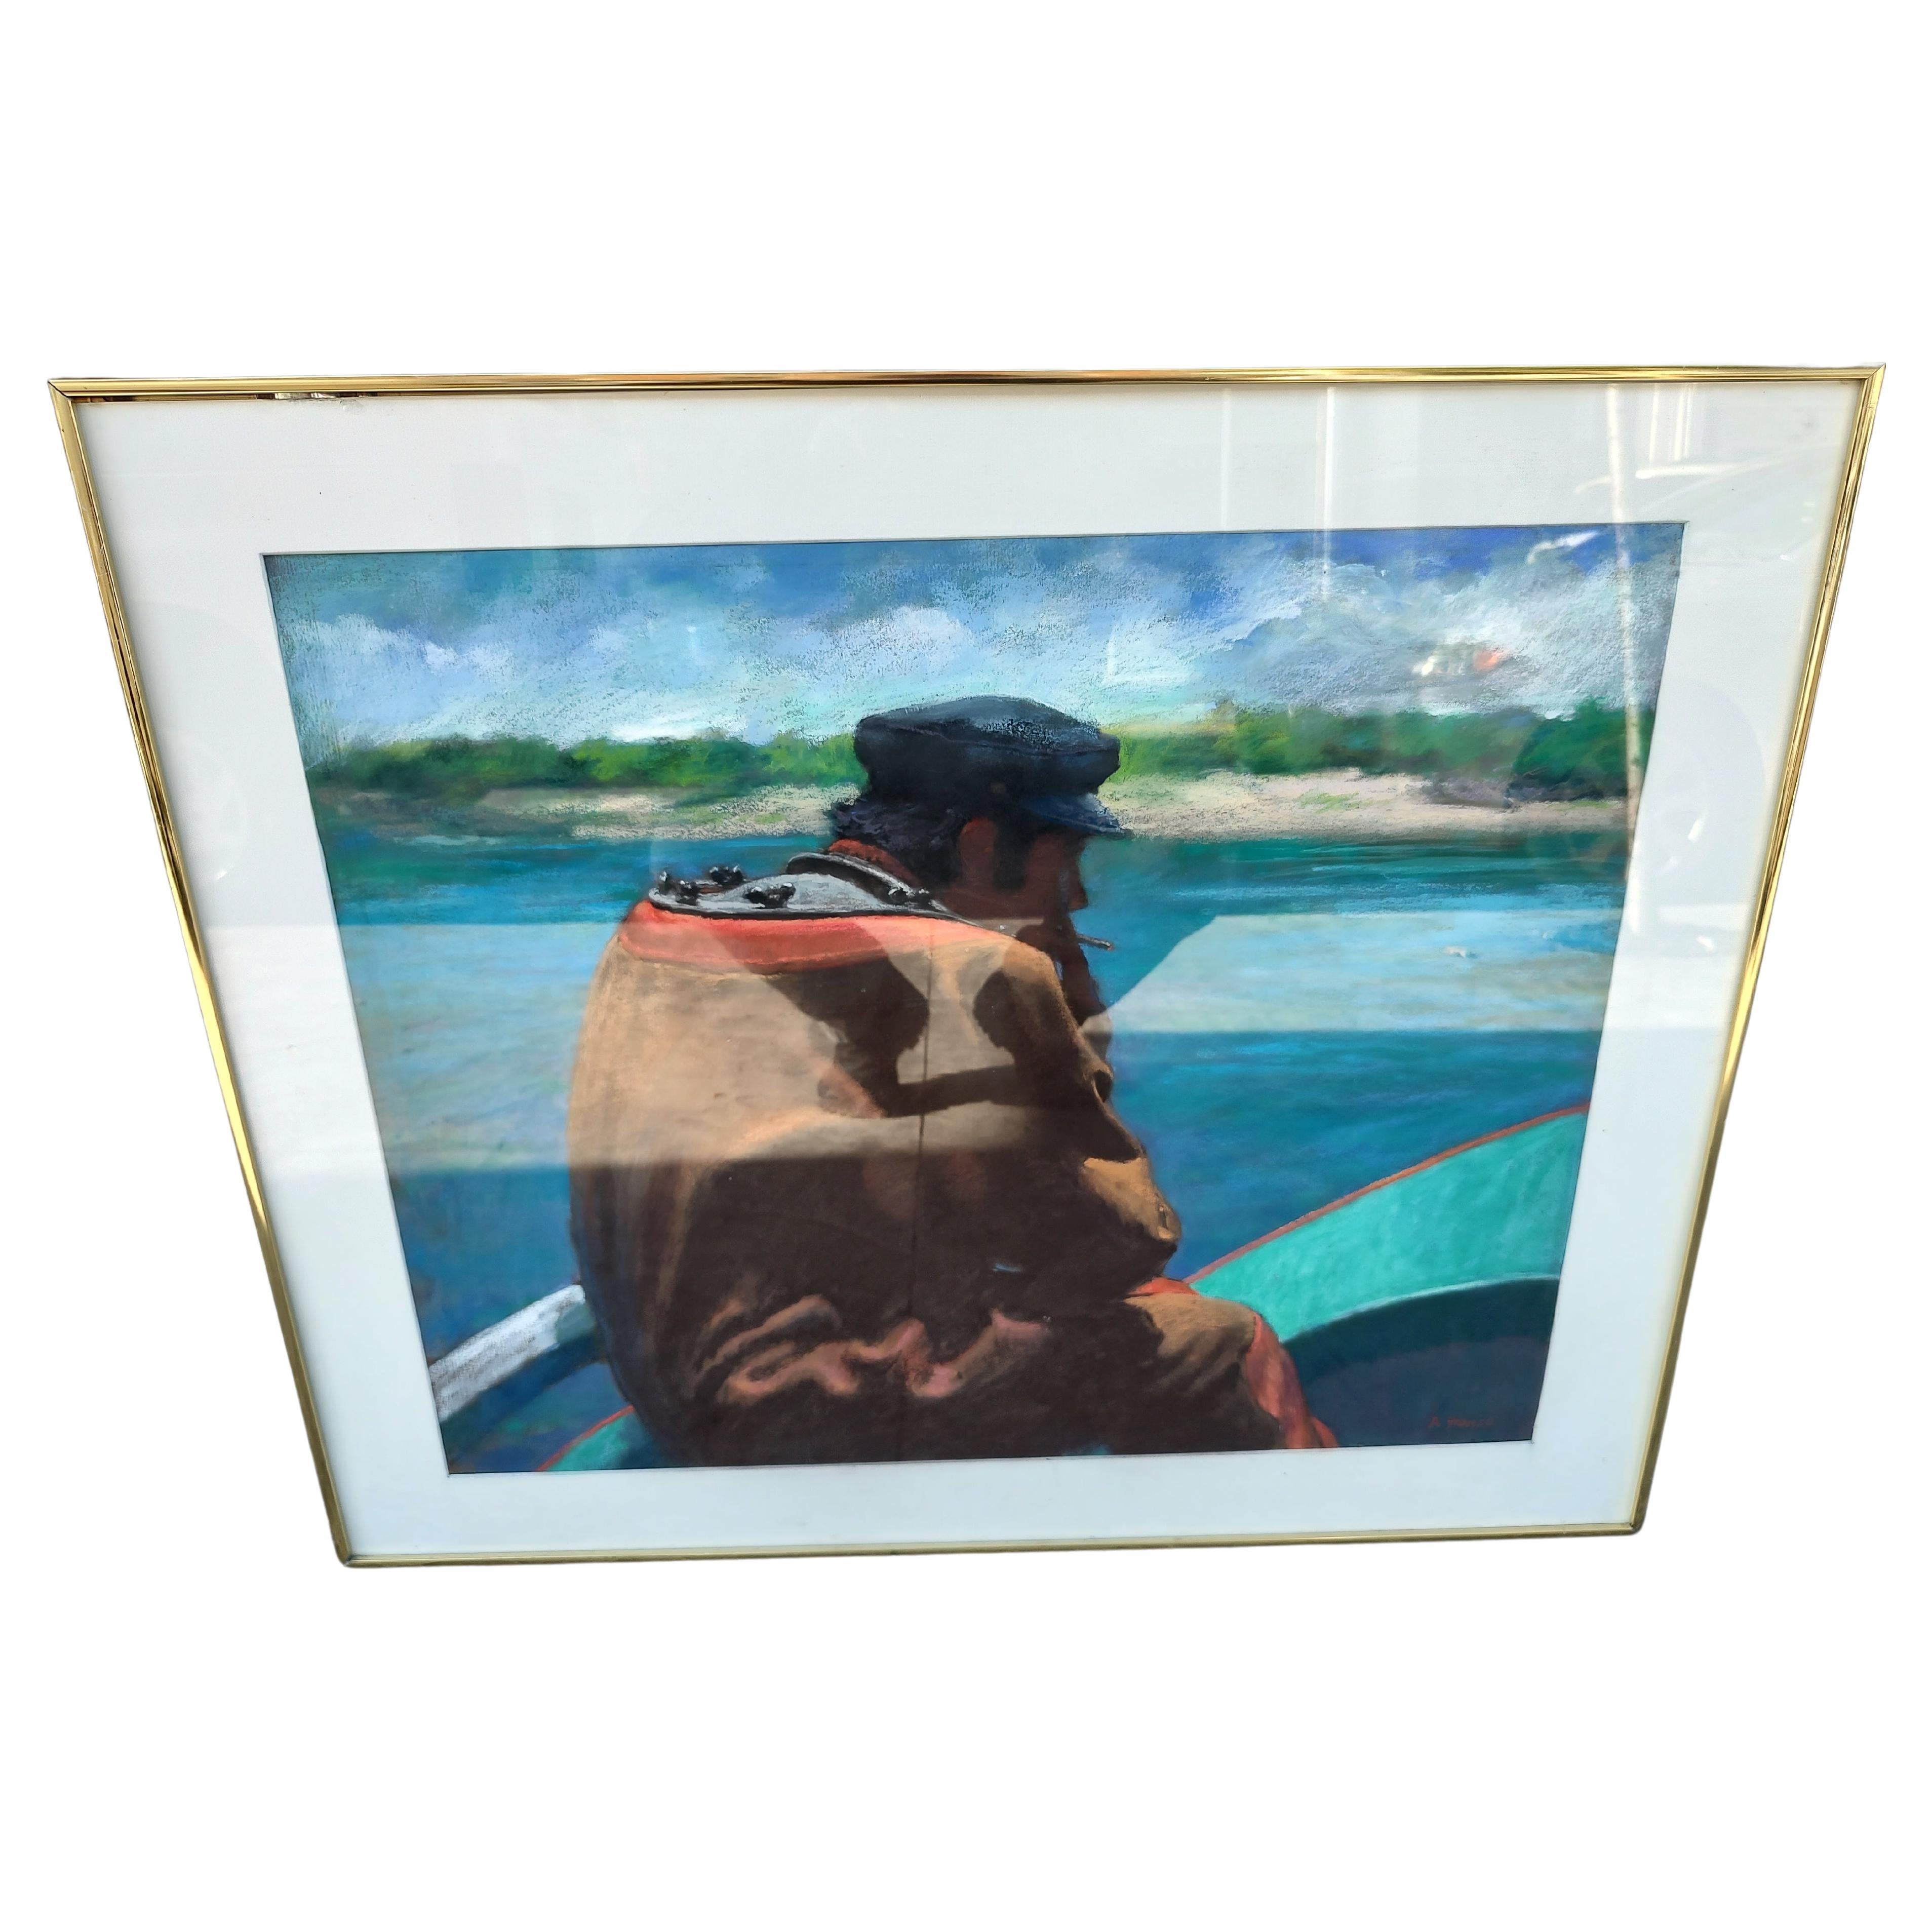 Beautifully executed pastel of a Sponge Diver in amazing colors. Signed lower right corner Americo Di Franza is the artist. In excellent condition.